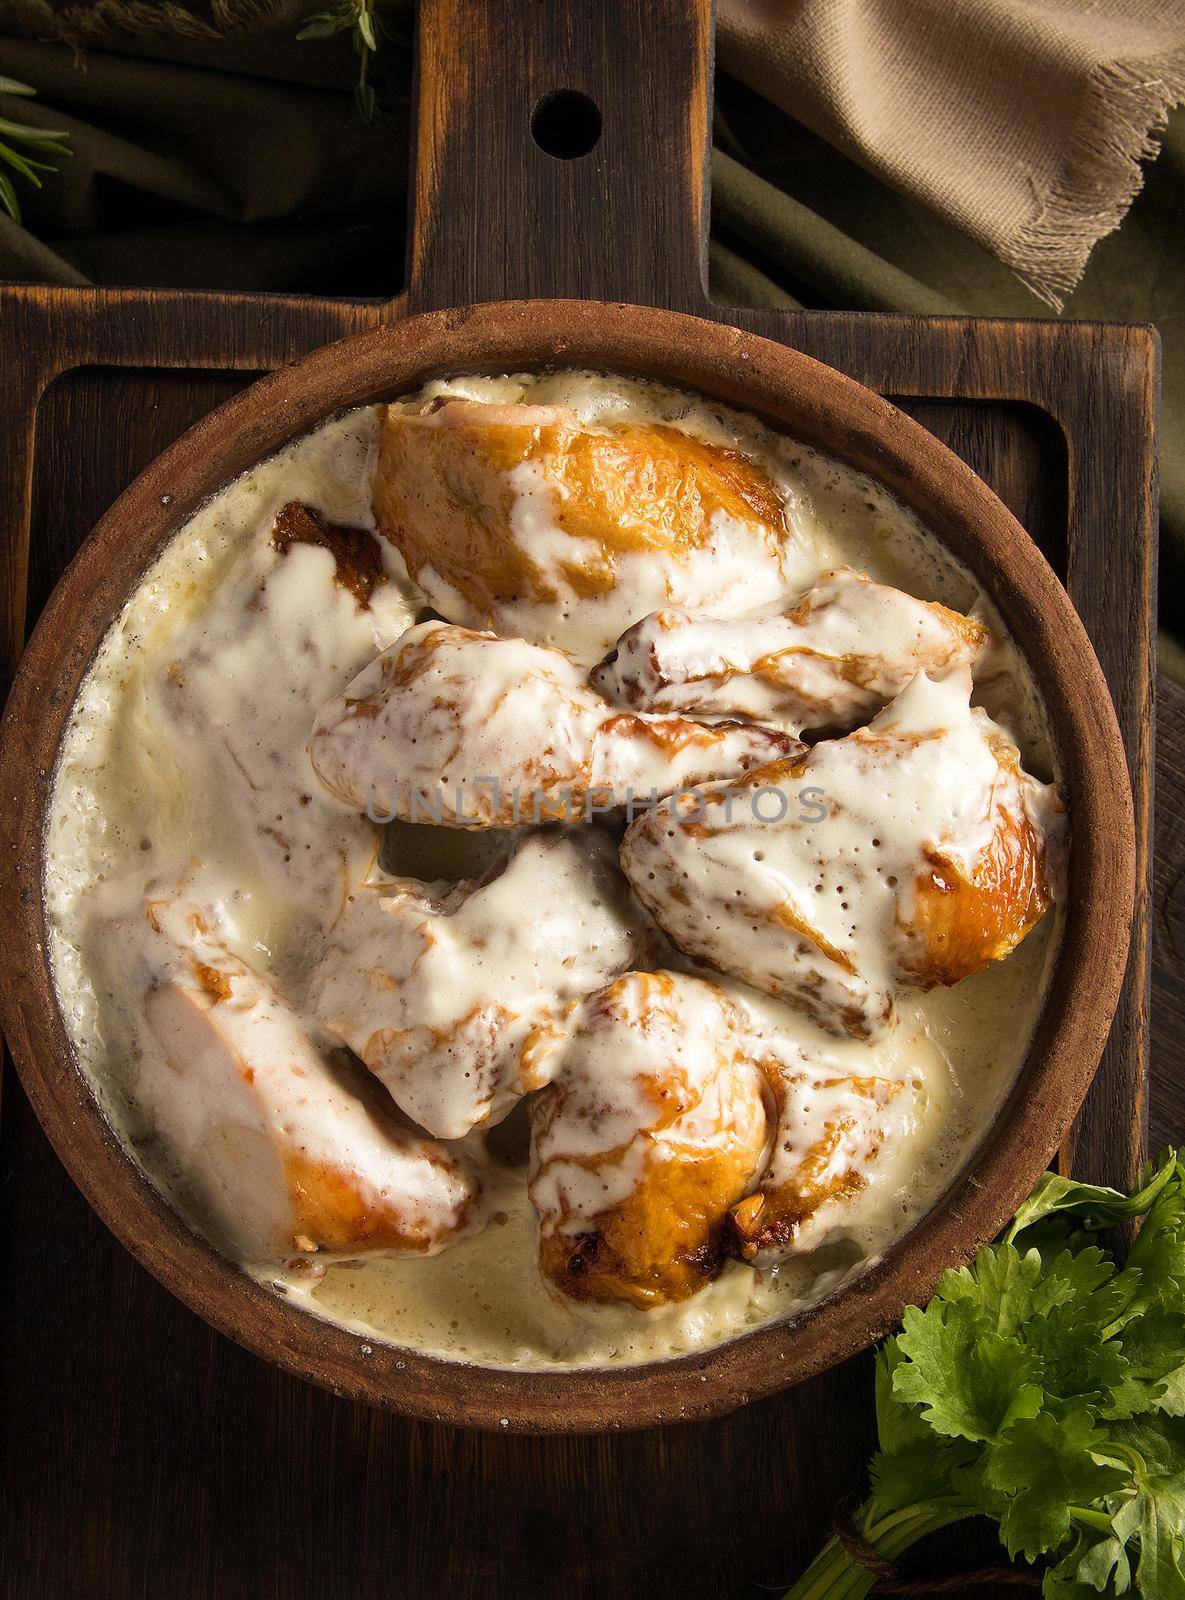 Top view of a chicken covered in a creamy sauce by A_Karim